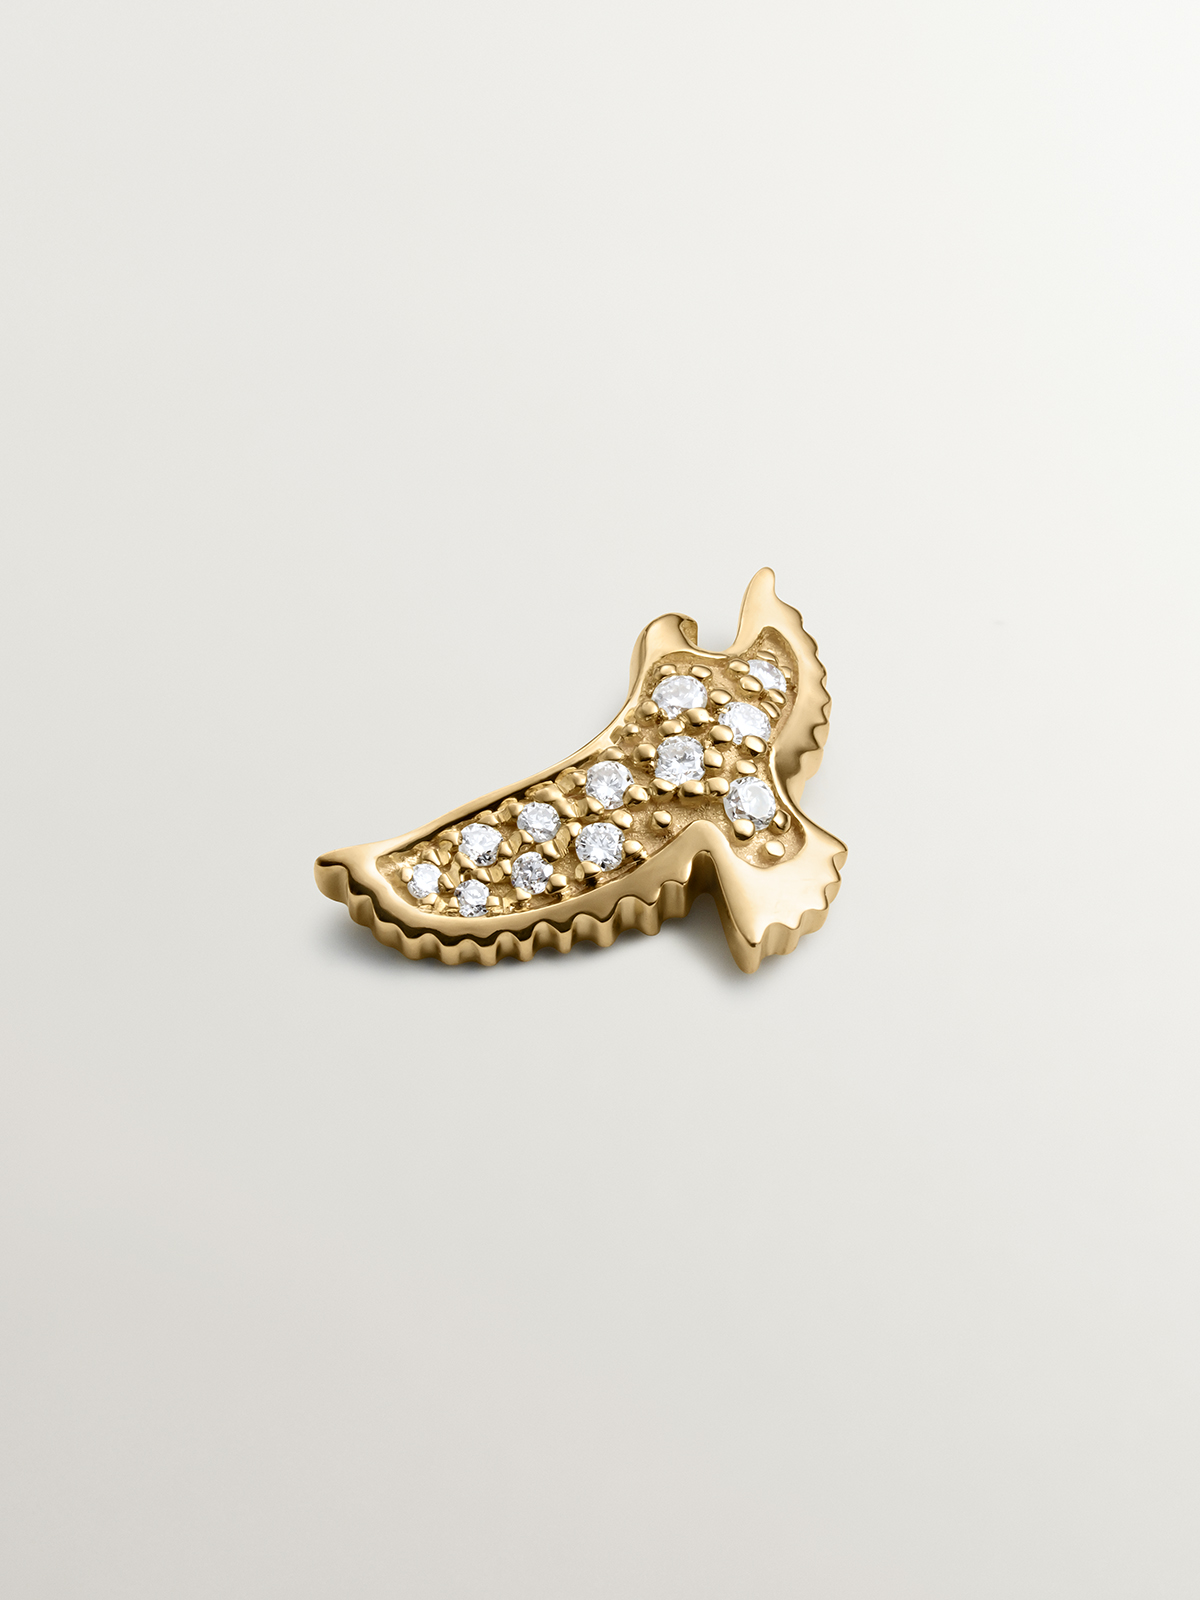 Individual 18K yellow gold earring with eagle shape and diamonds.